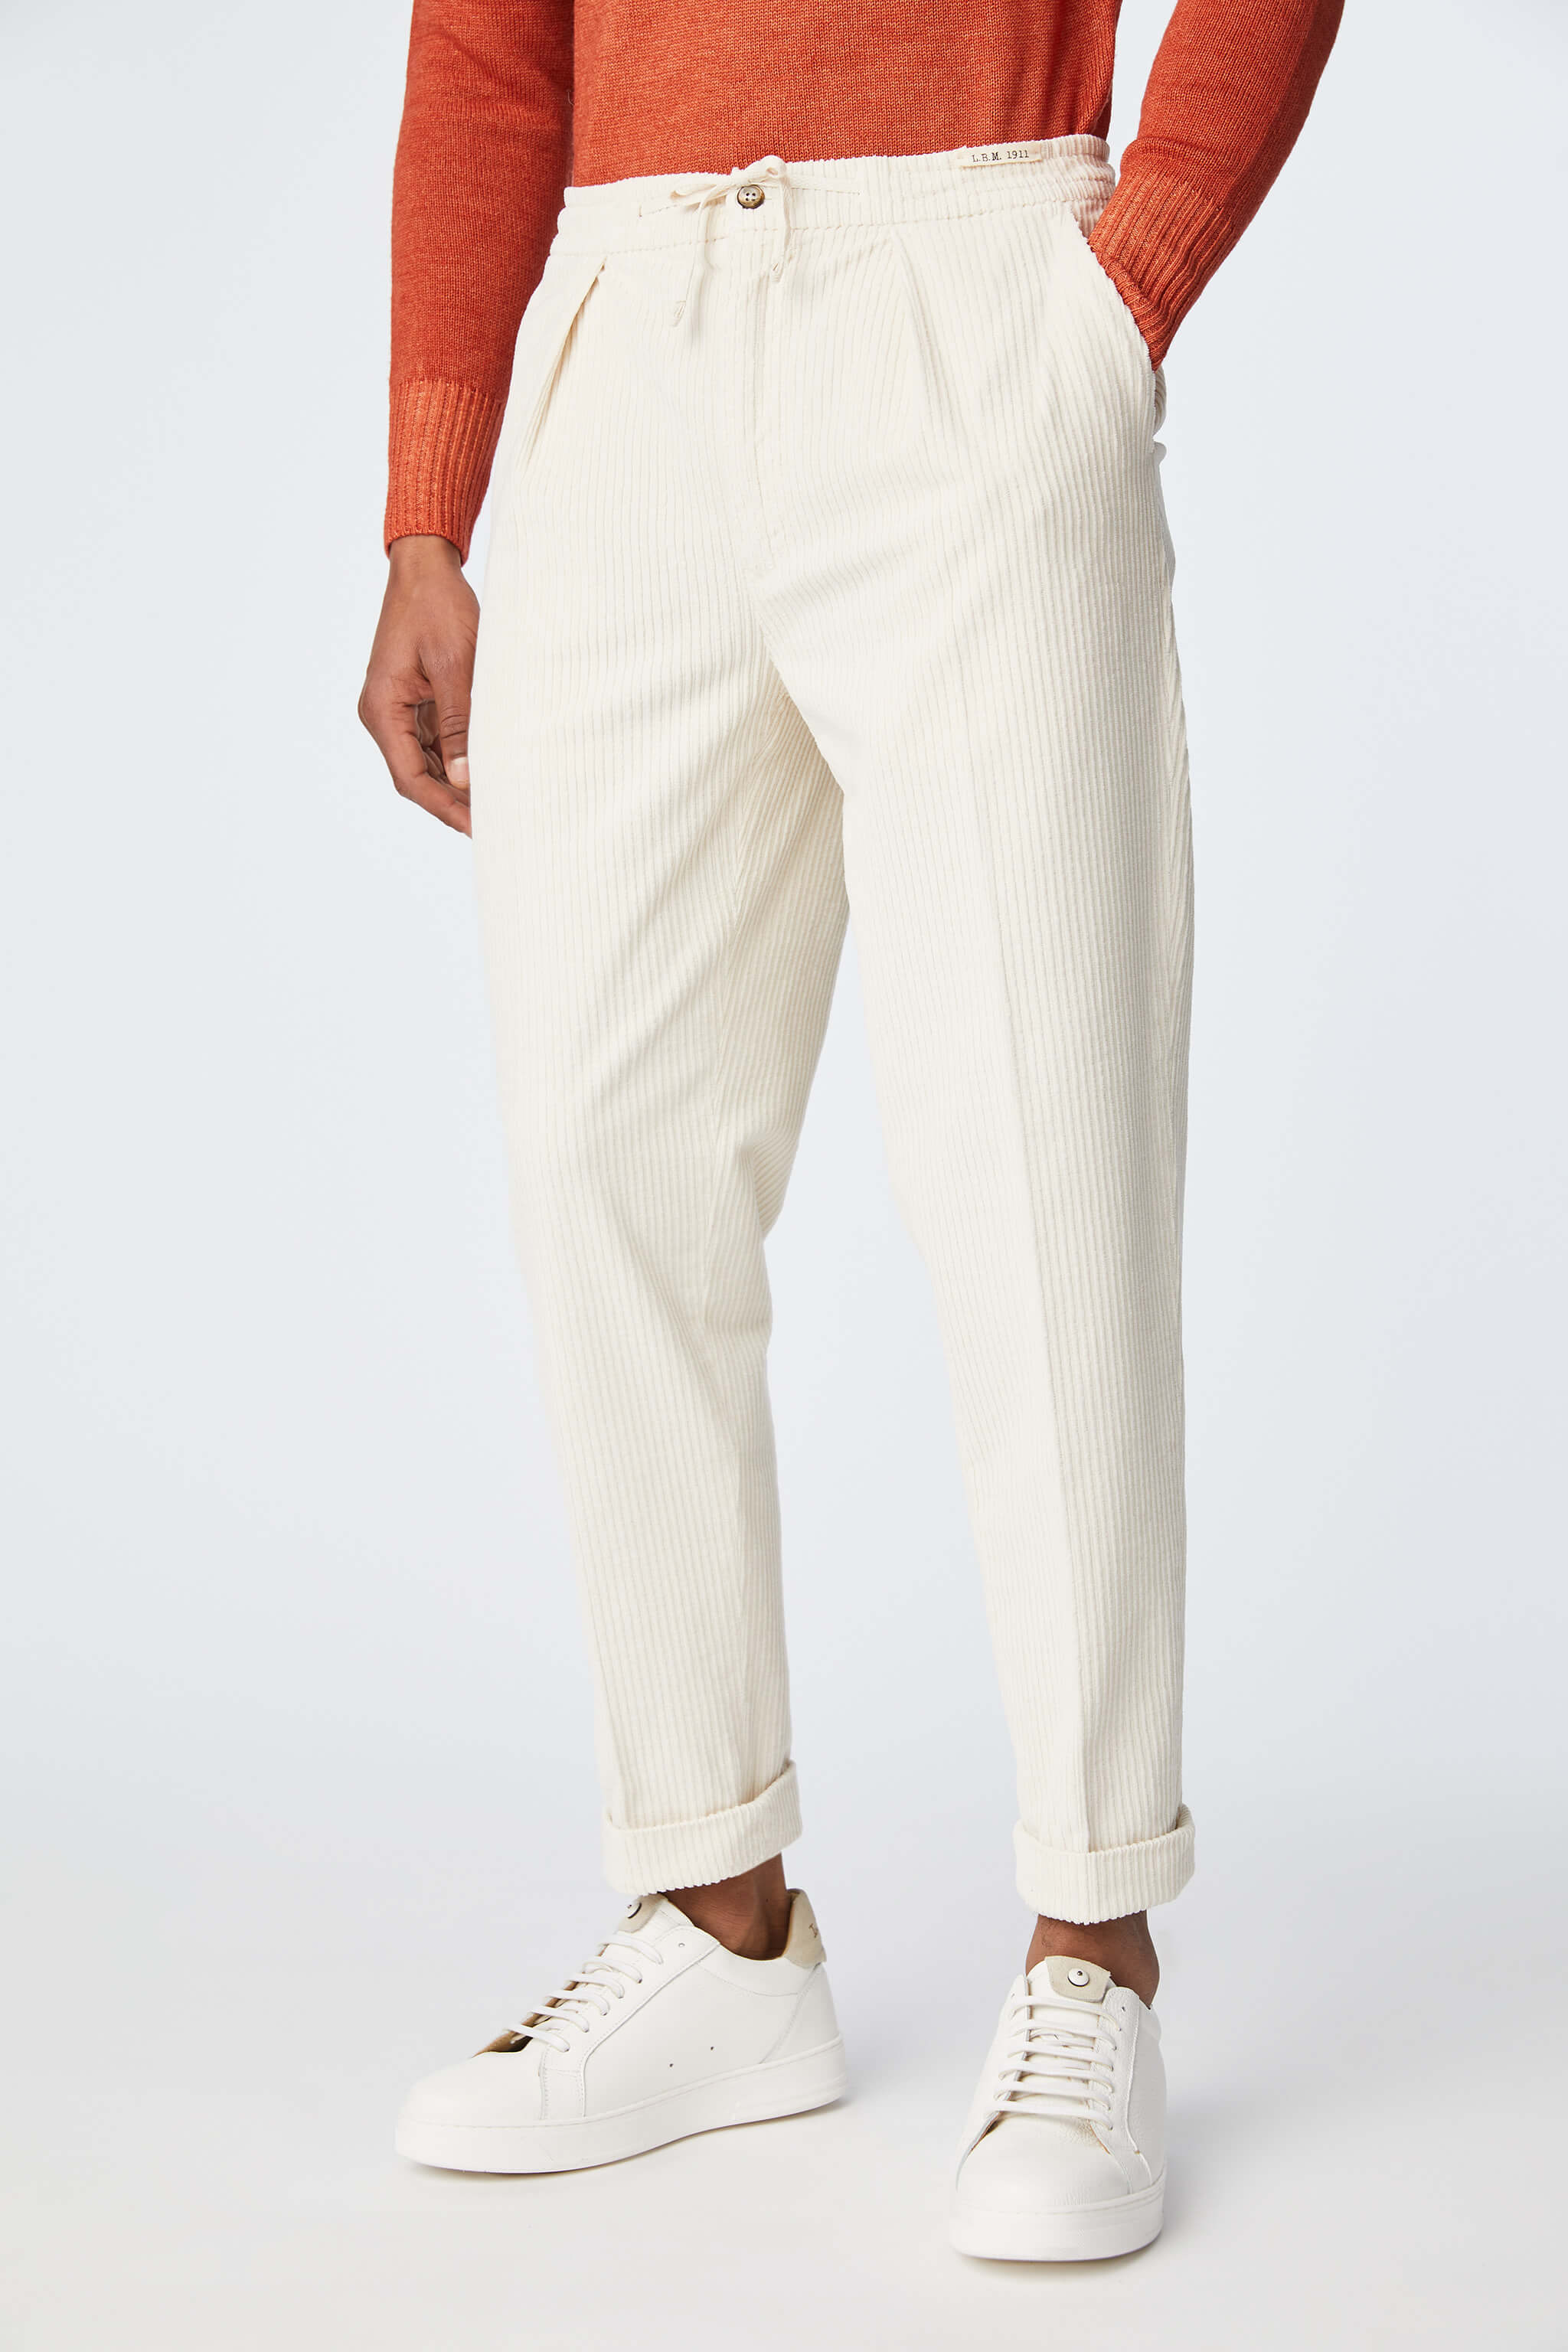 Garment-dyed LESTER pants in ivory